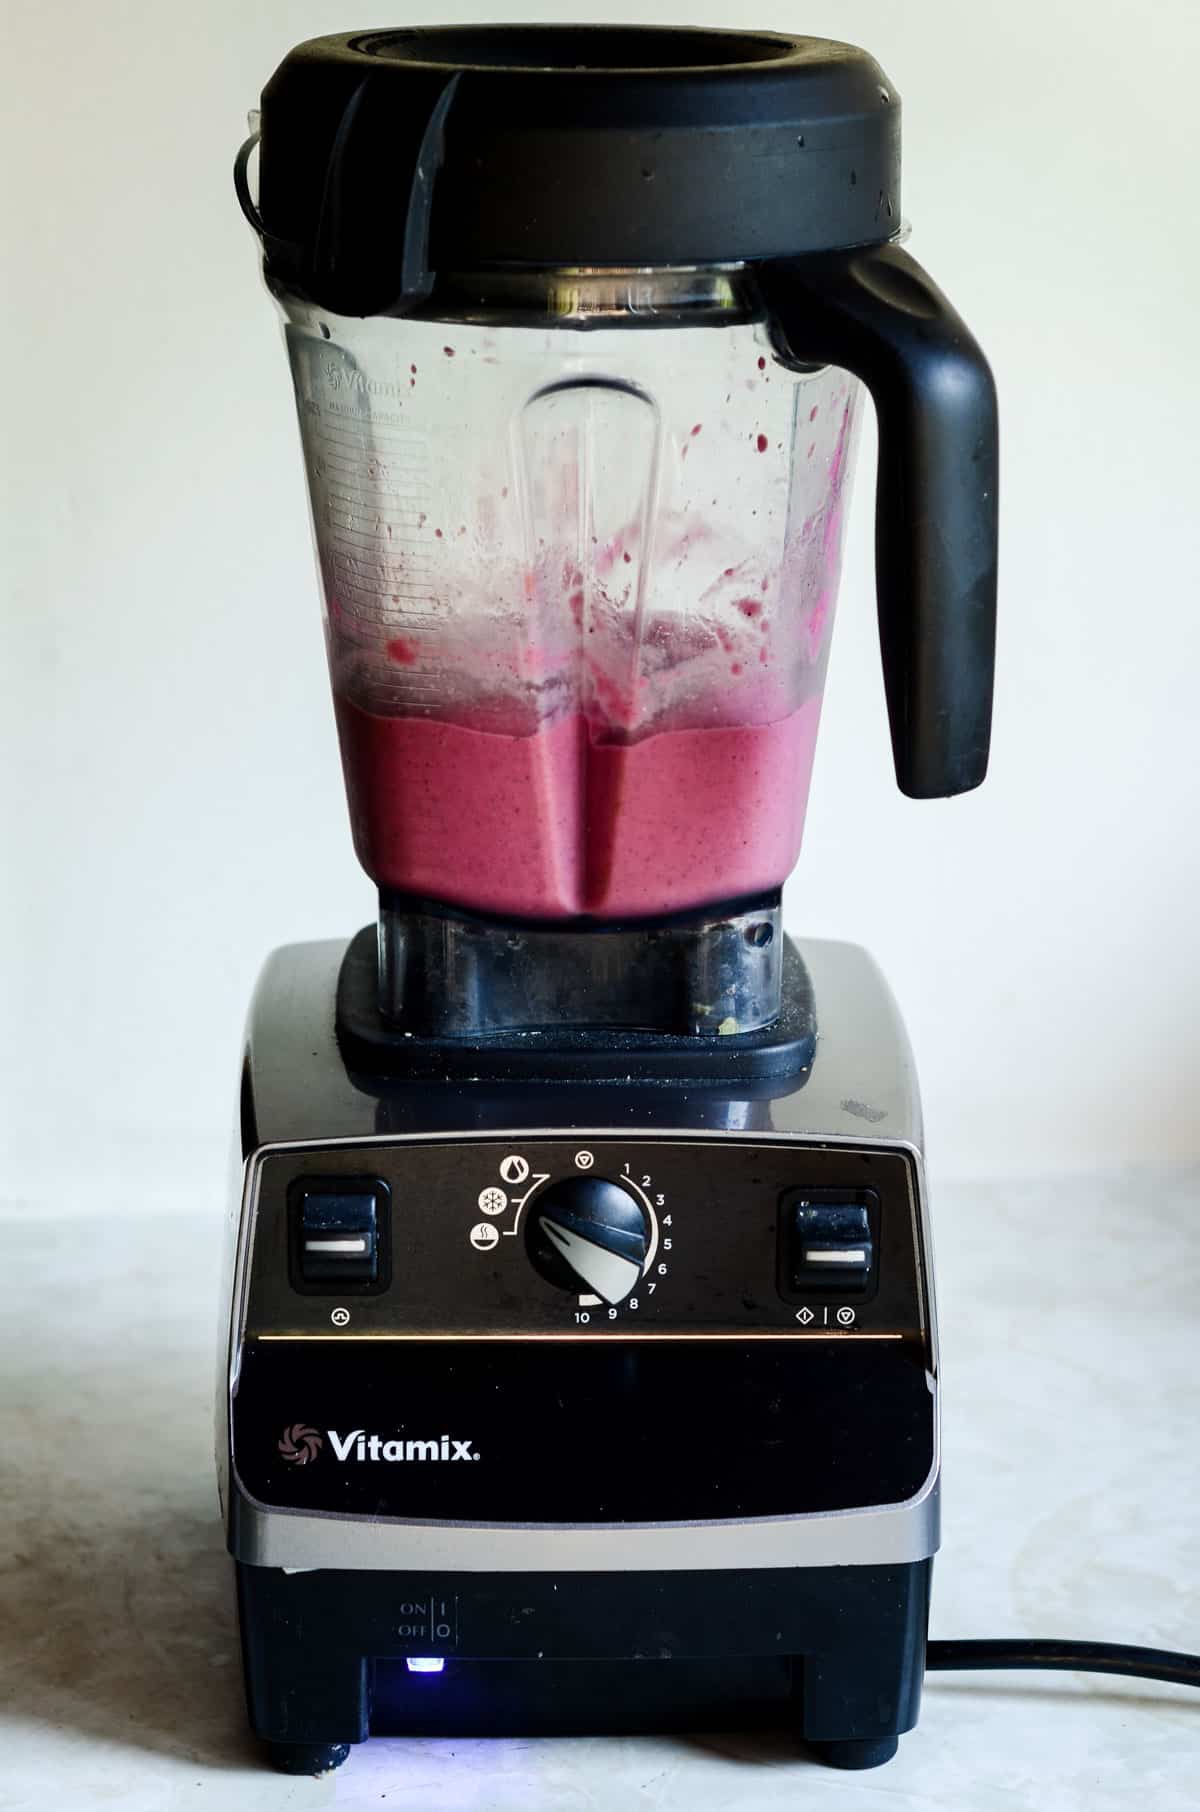 Pink smoothie from dragon fruit and pineapple in a vitamix blender.